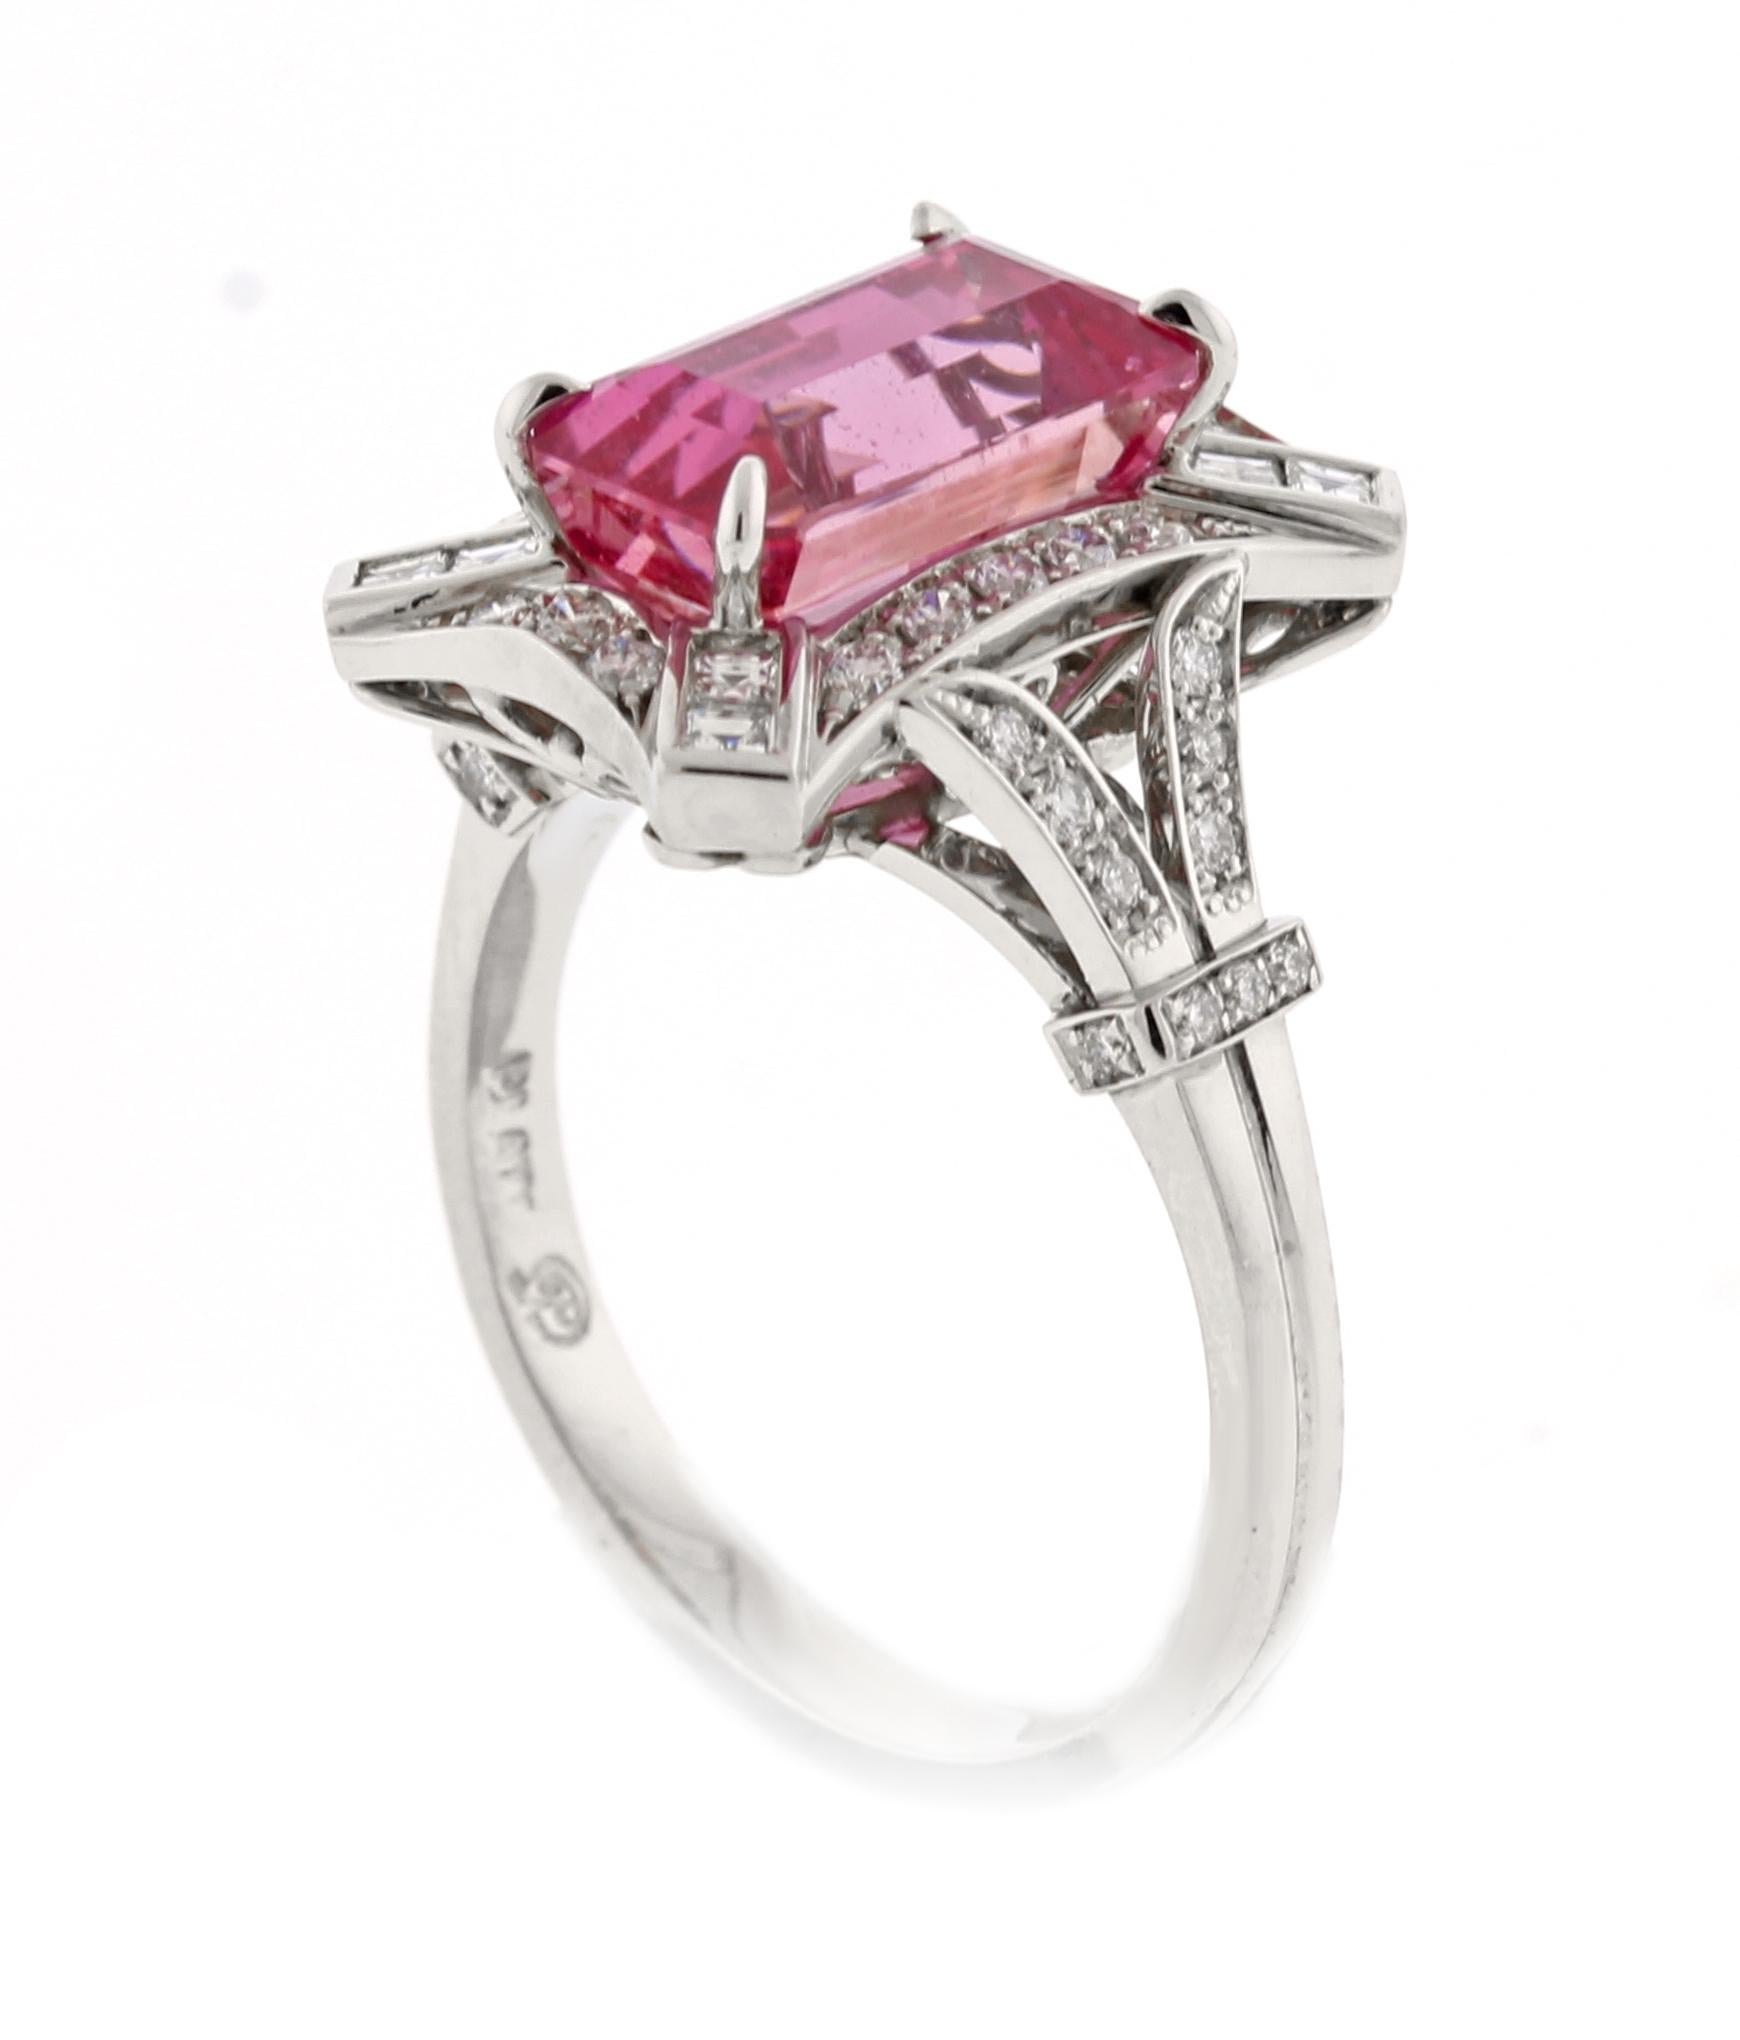 From the master ring makers of Pampillonia jewelers an emerald cut hot pink sapphire and diamond handmade ring
♦ Designer: Pampillonia
♦ Metal: Platinum
♦ Pink Emerald cut sapphire=3.92
♦ 49D=.45
♦ Circa 2020
♦ Size 6, Resizable
♦ Packaging: